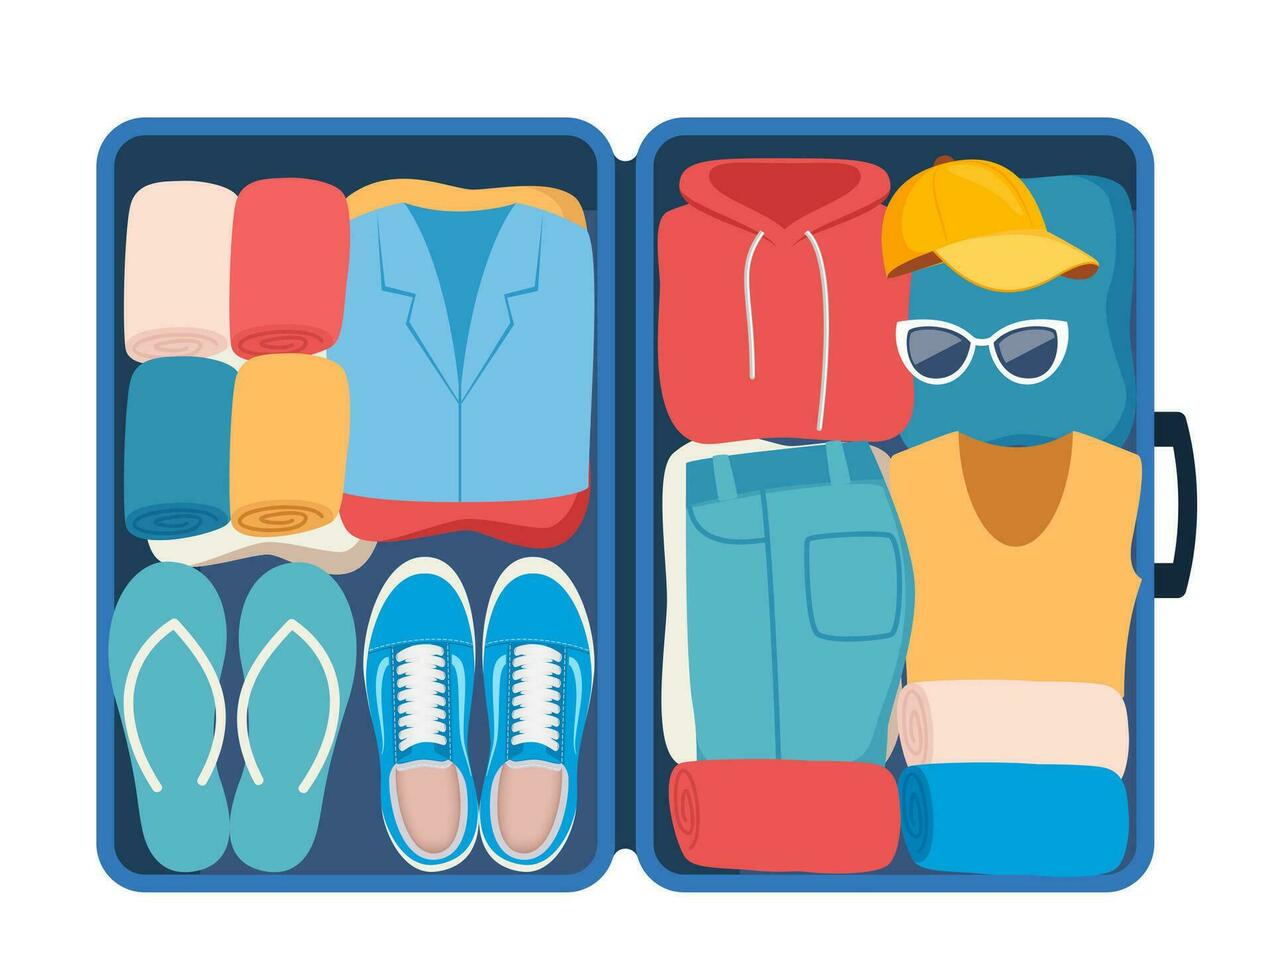 Suitcase with packed clothes for travel in top view. Clothing, footwear and accessories. Personal belongings in luggage, going on vacation, journey or business trip. Vector illustration.